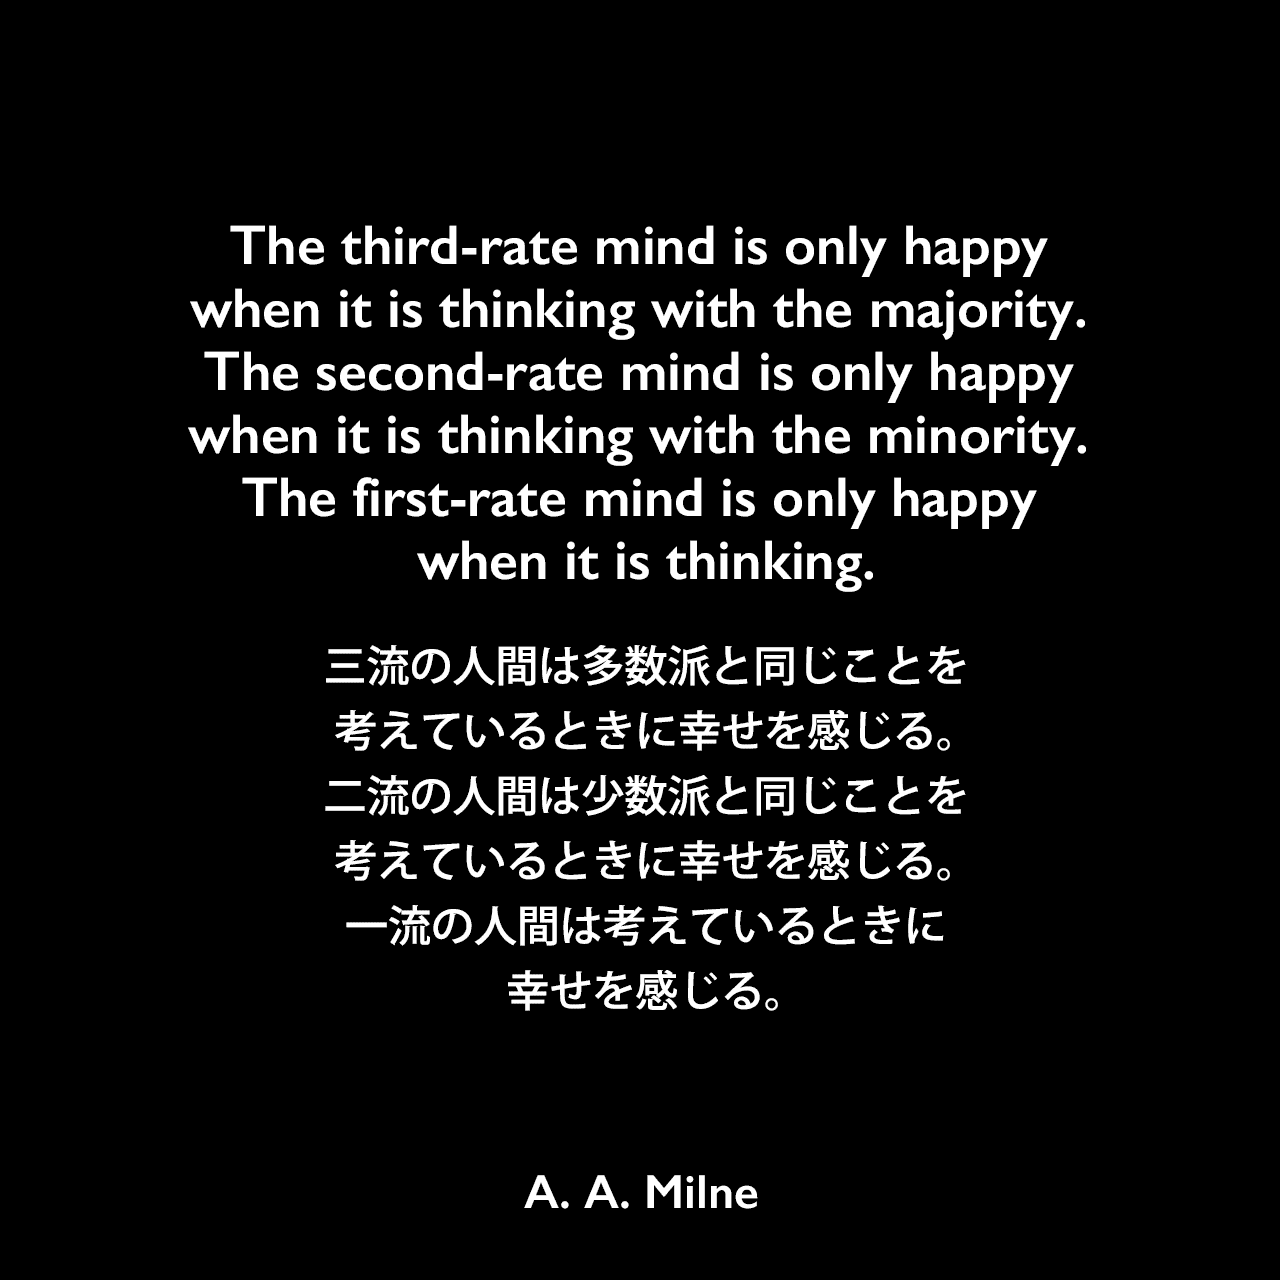 The third-rate mind is only happy when it is thinking with the majority. The second-rate mind is only happy when it is thinking with the minority. The first-rate mind is only happy when it is thinking.三流の人間は多数派と同じことを考えているときに幸せを感じる。二流の人間は少数派と同じことを考えているときに幸せを感じる。一流の人間は考えているときに幸せを感じる。A. A. Milne